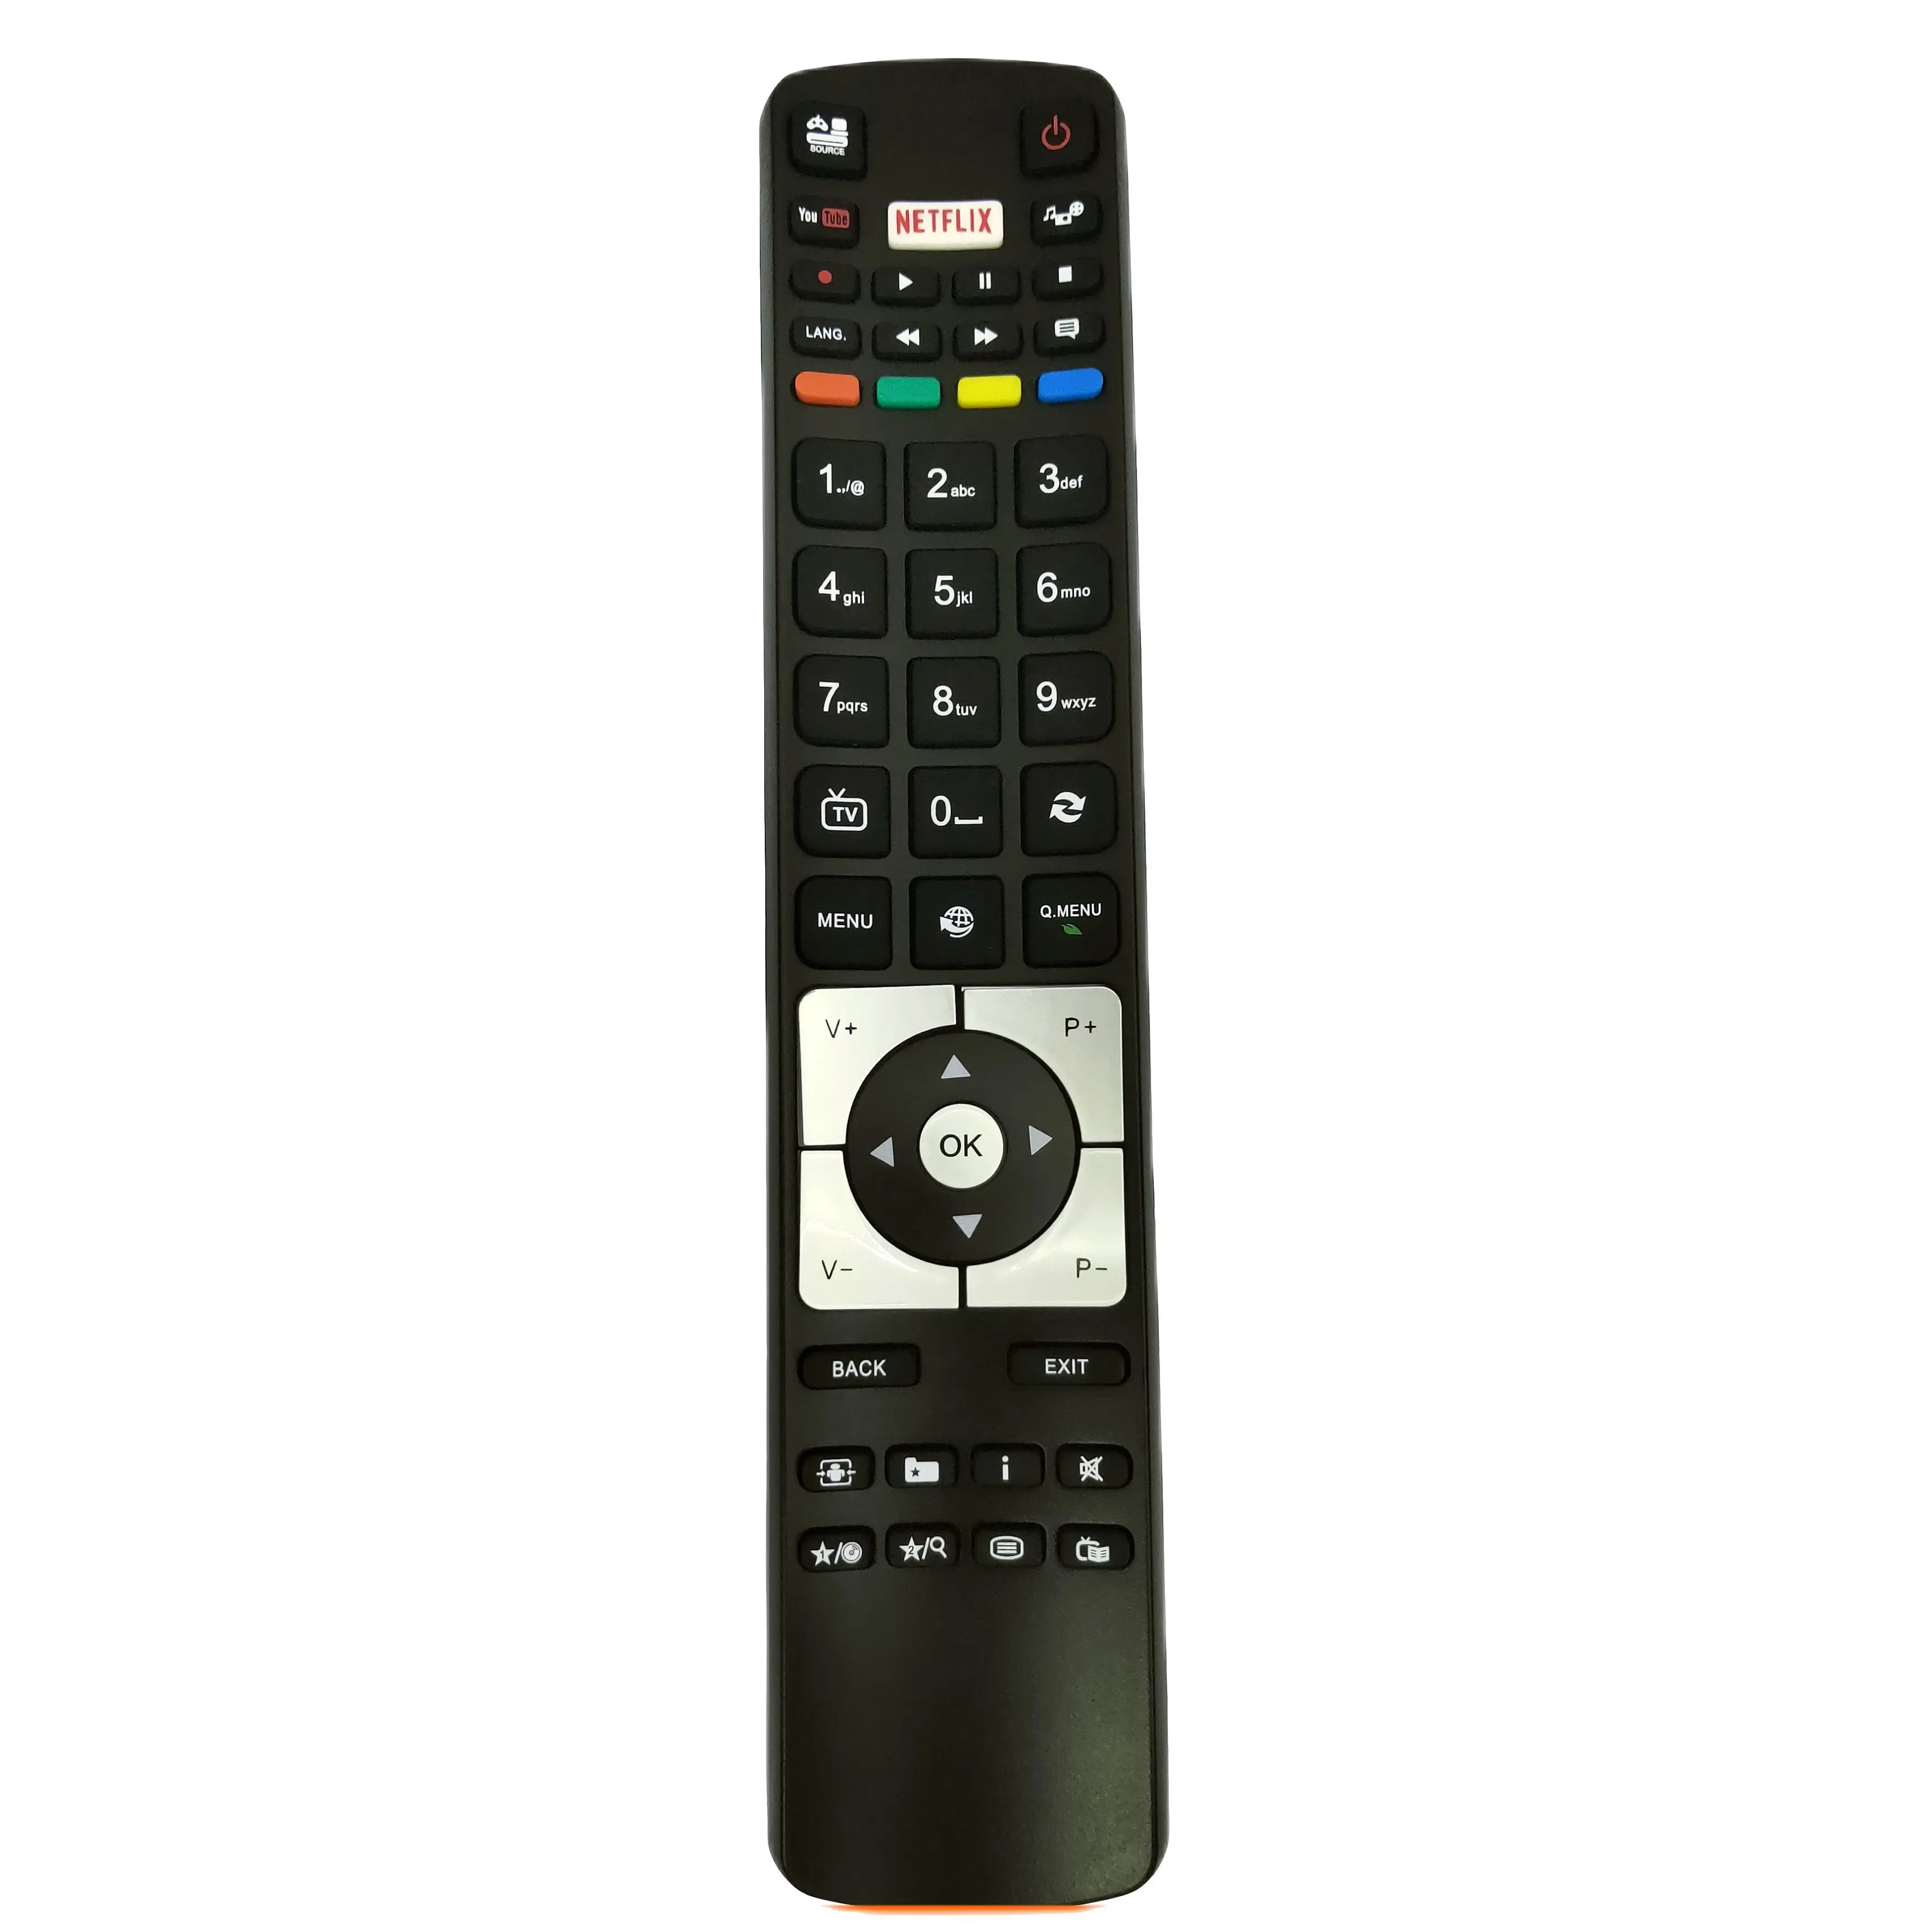 Remote Control Rc5118 With Netflix Now Youtube Fernbedienung